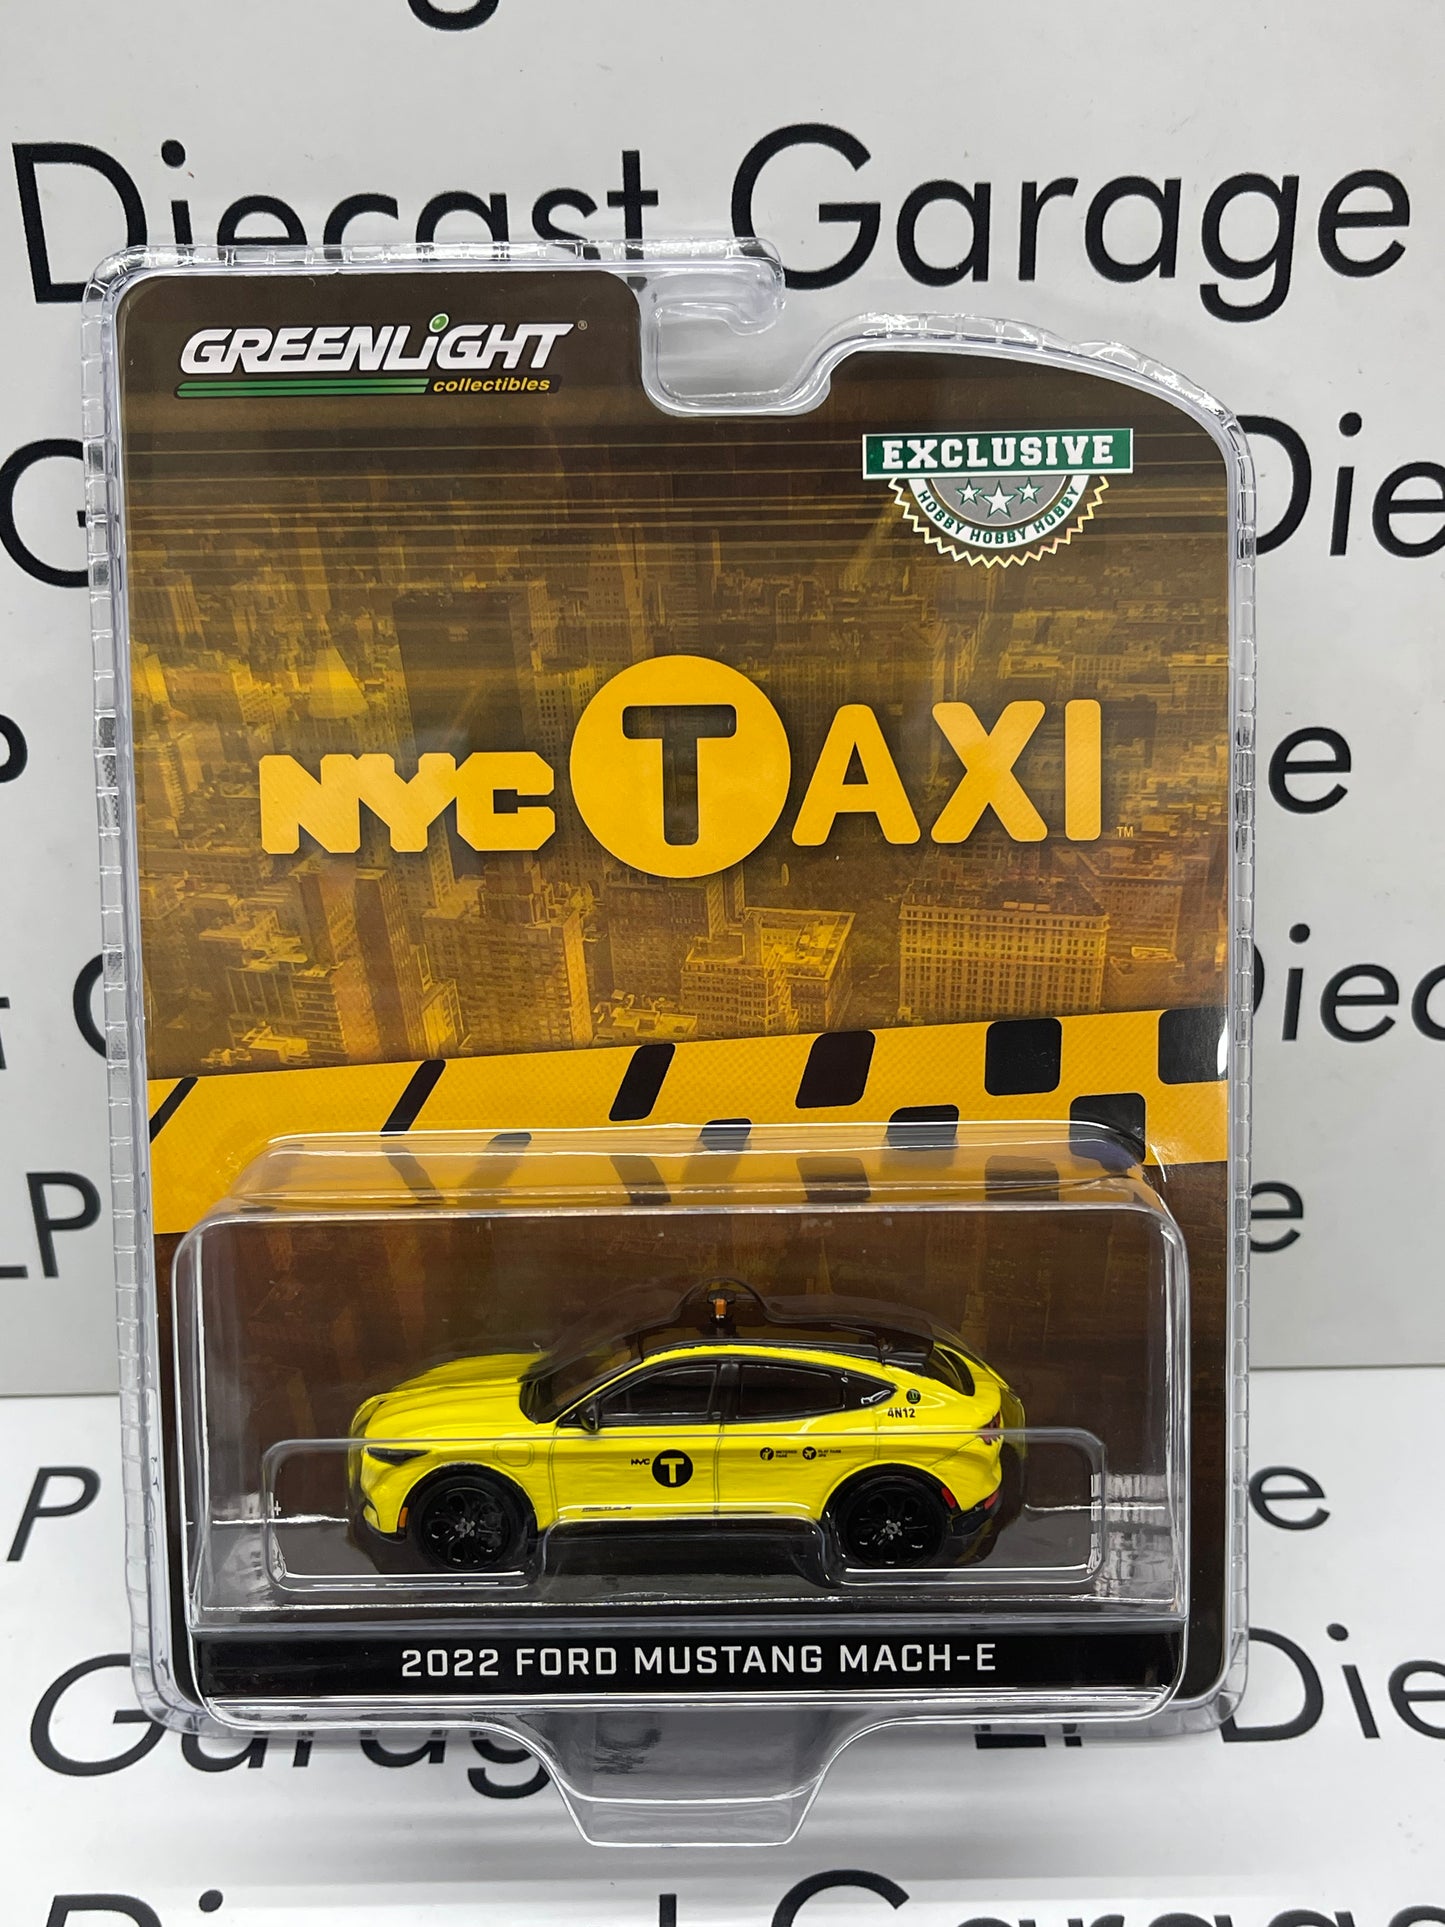 GREENLIGHT 2022 Ford Mustang Mach-E NYC Taxi Hobby Exclusive 1:64 Diecast